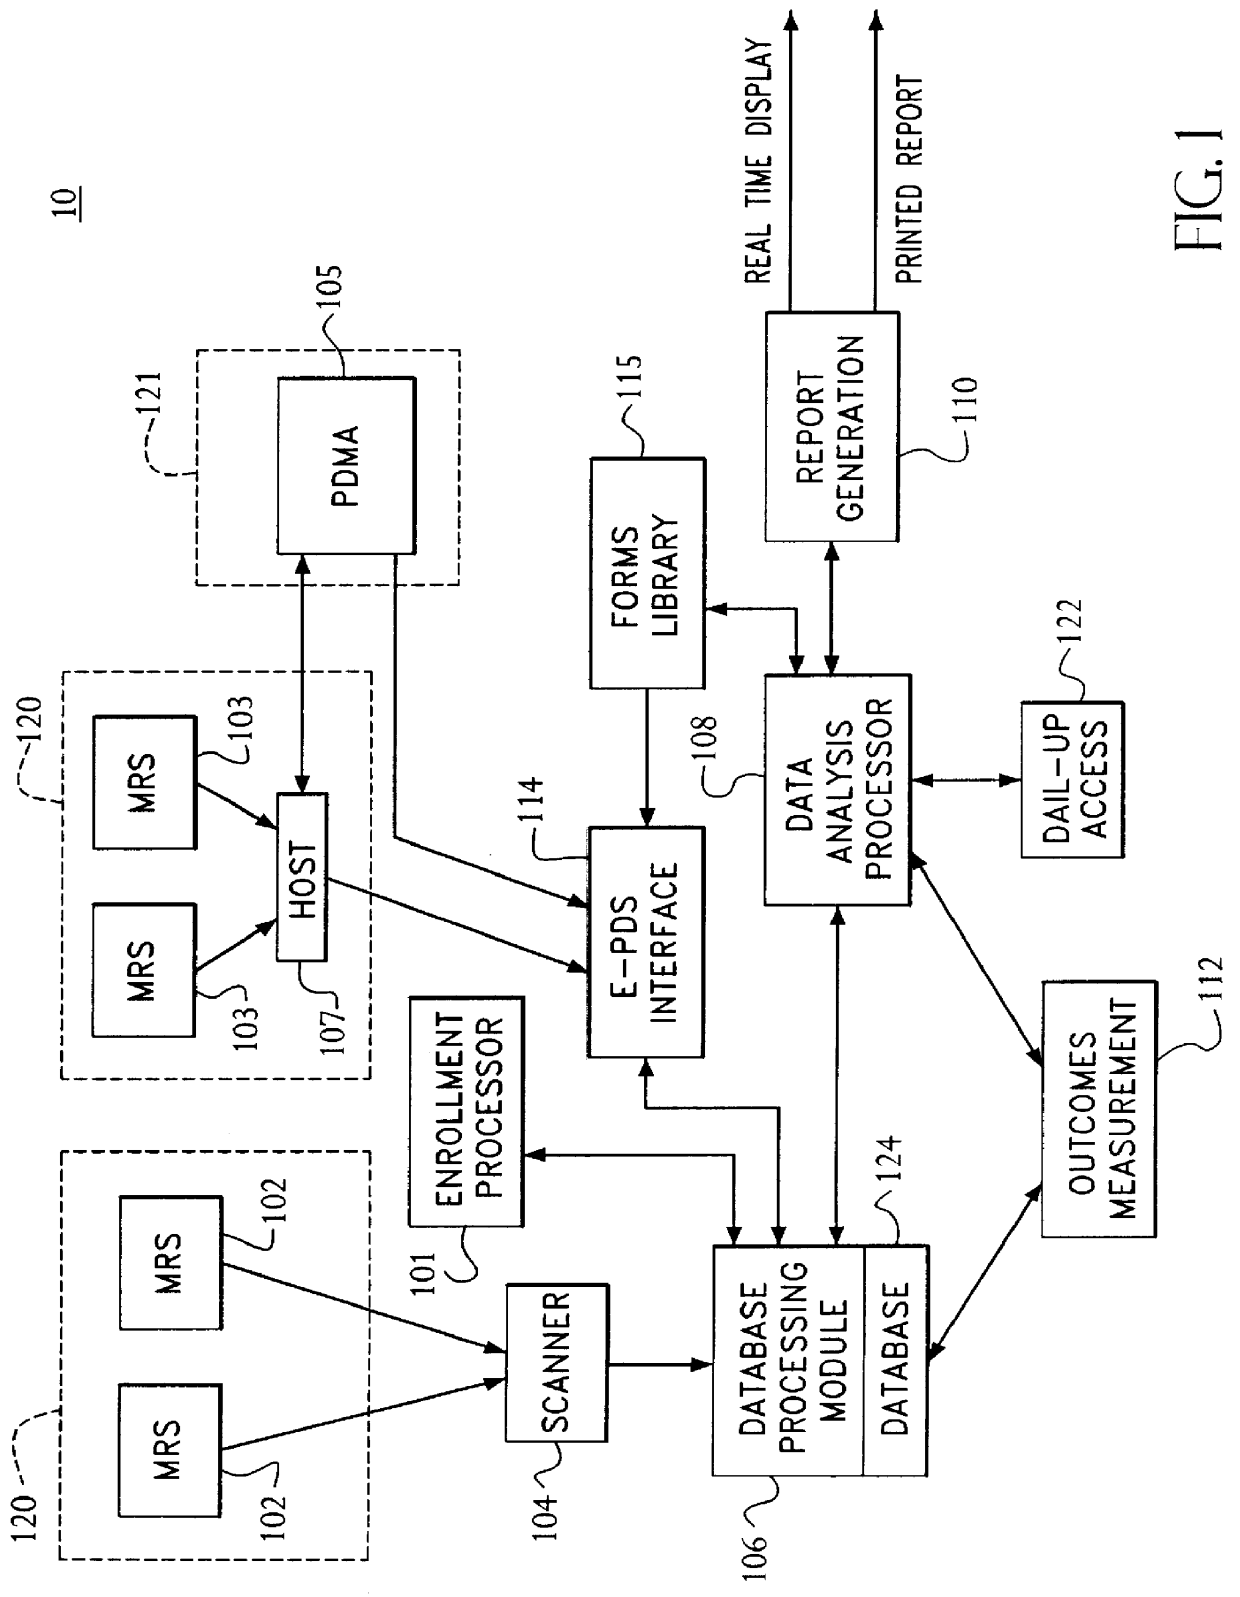 System for and method of collecting and populating a database with physician/patient data for processing to improve practice quality and healthcare delivery